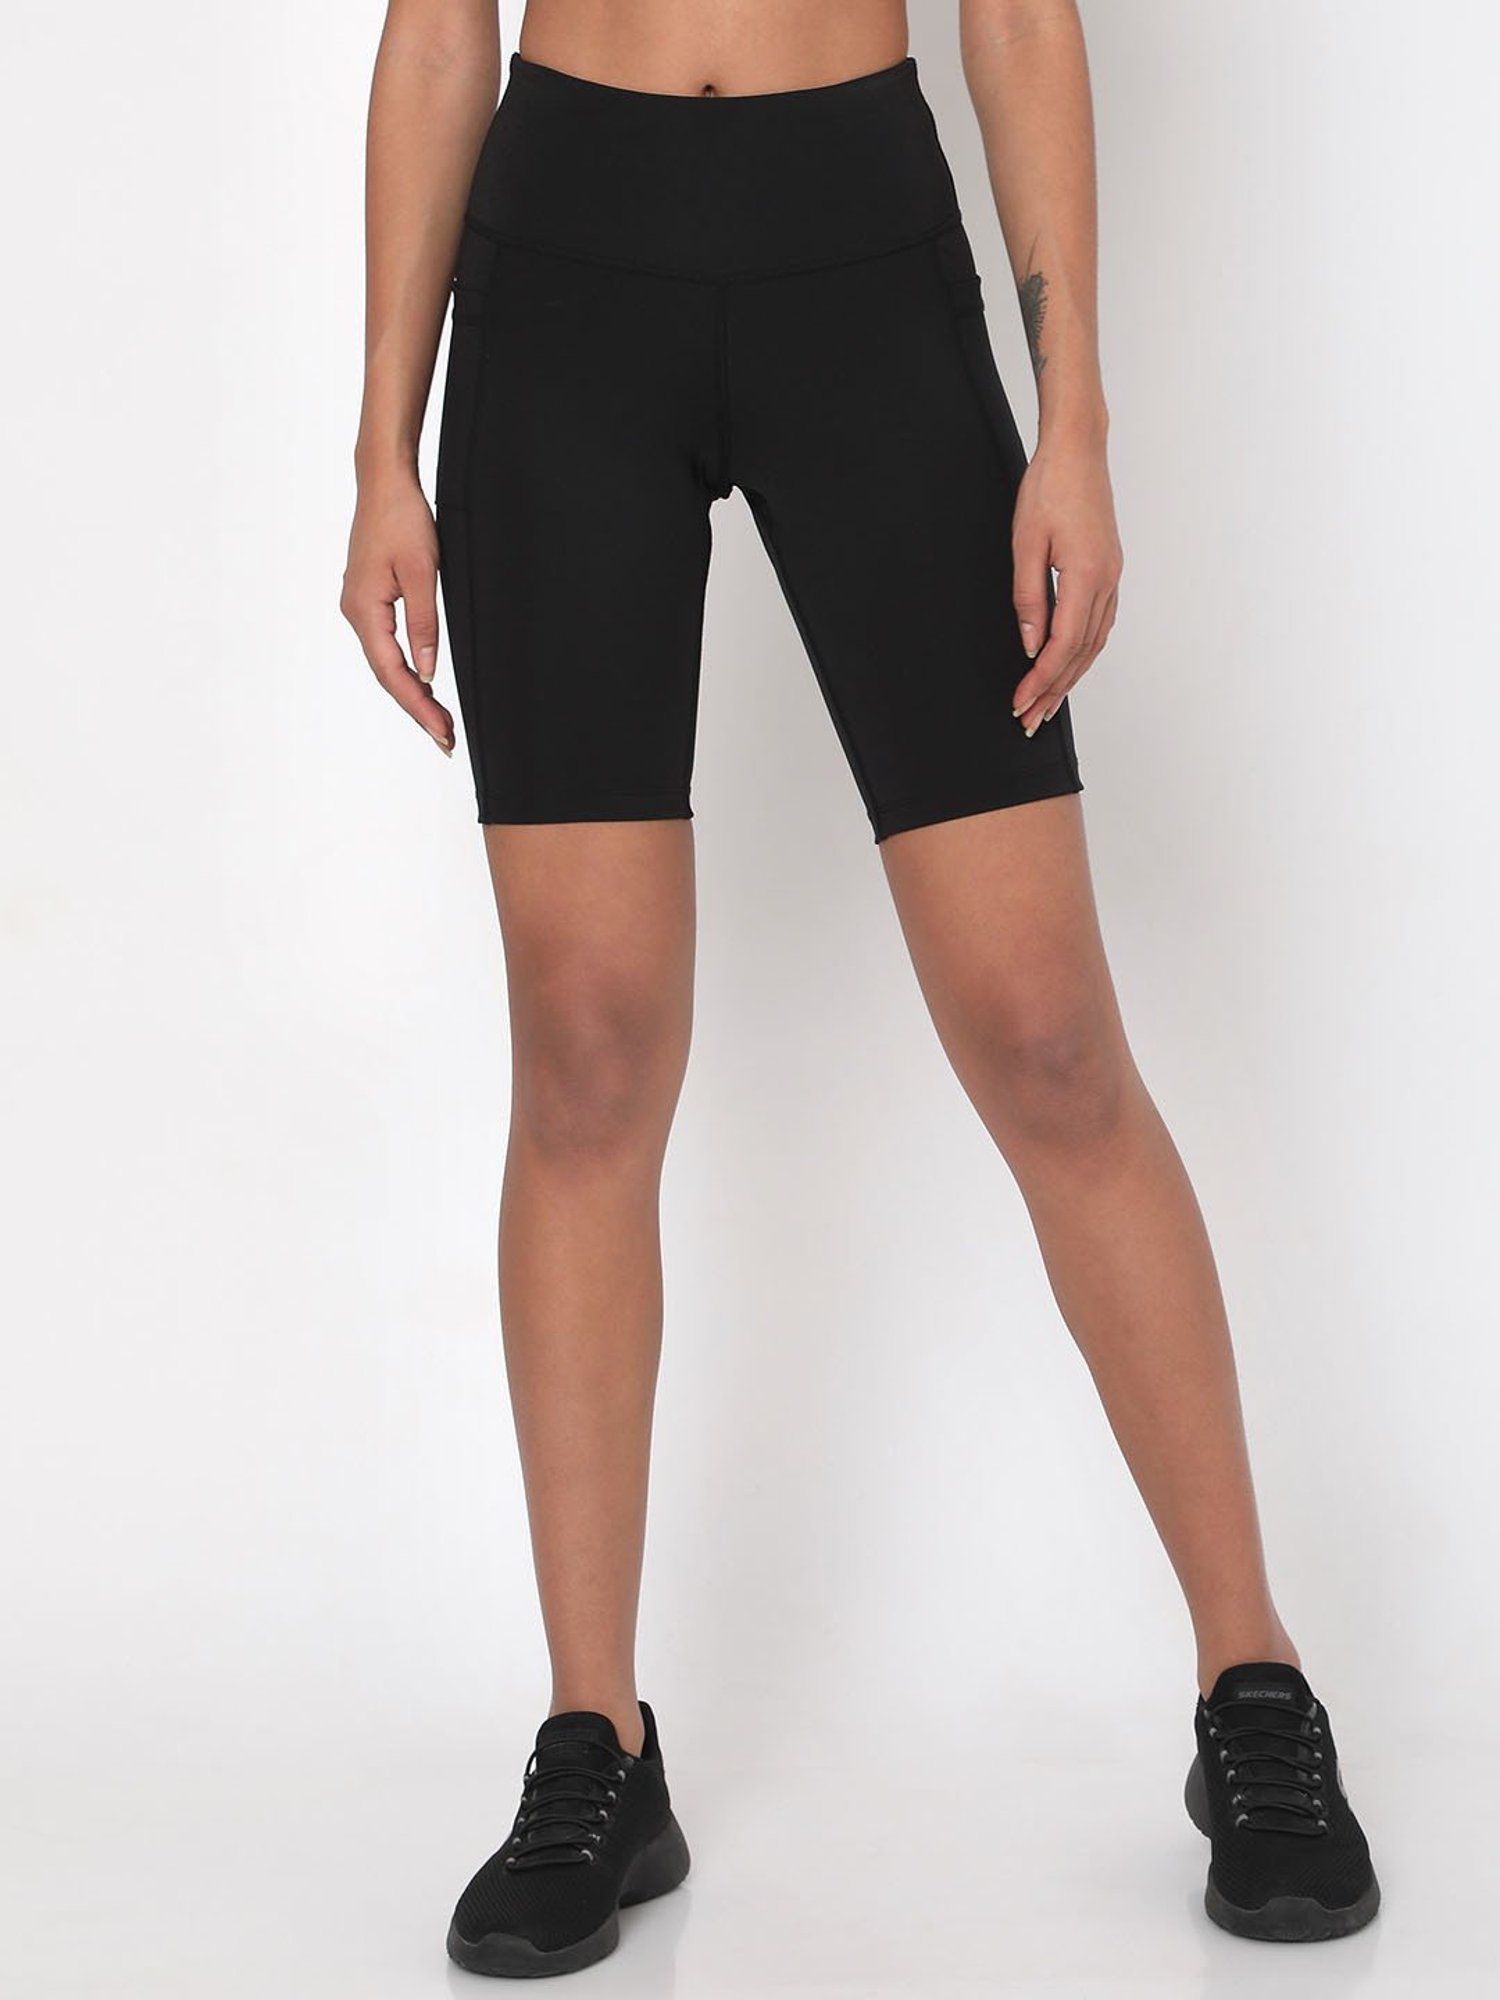 SILVERTRAQ Black Polyester Relaxed Fit Cycling Shorts